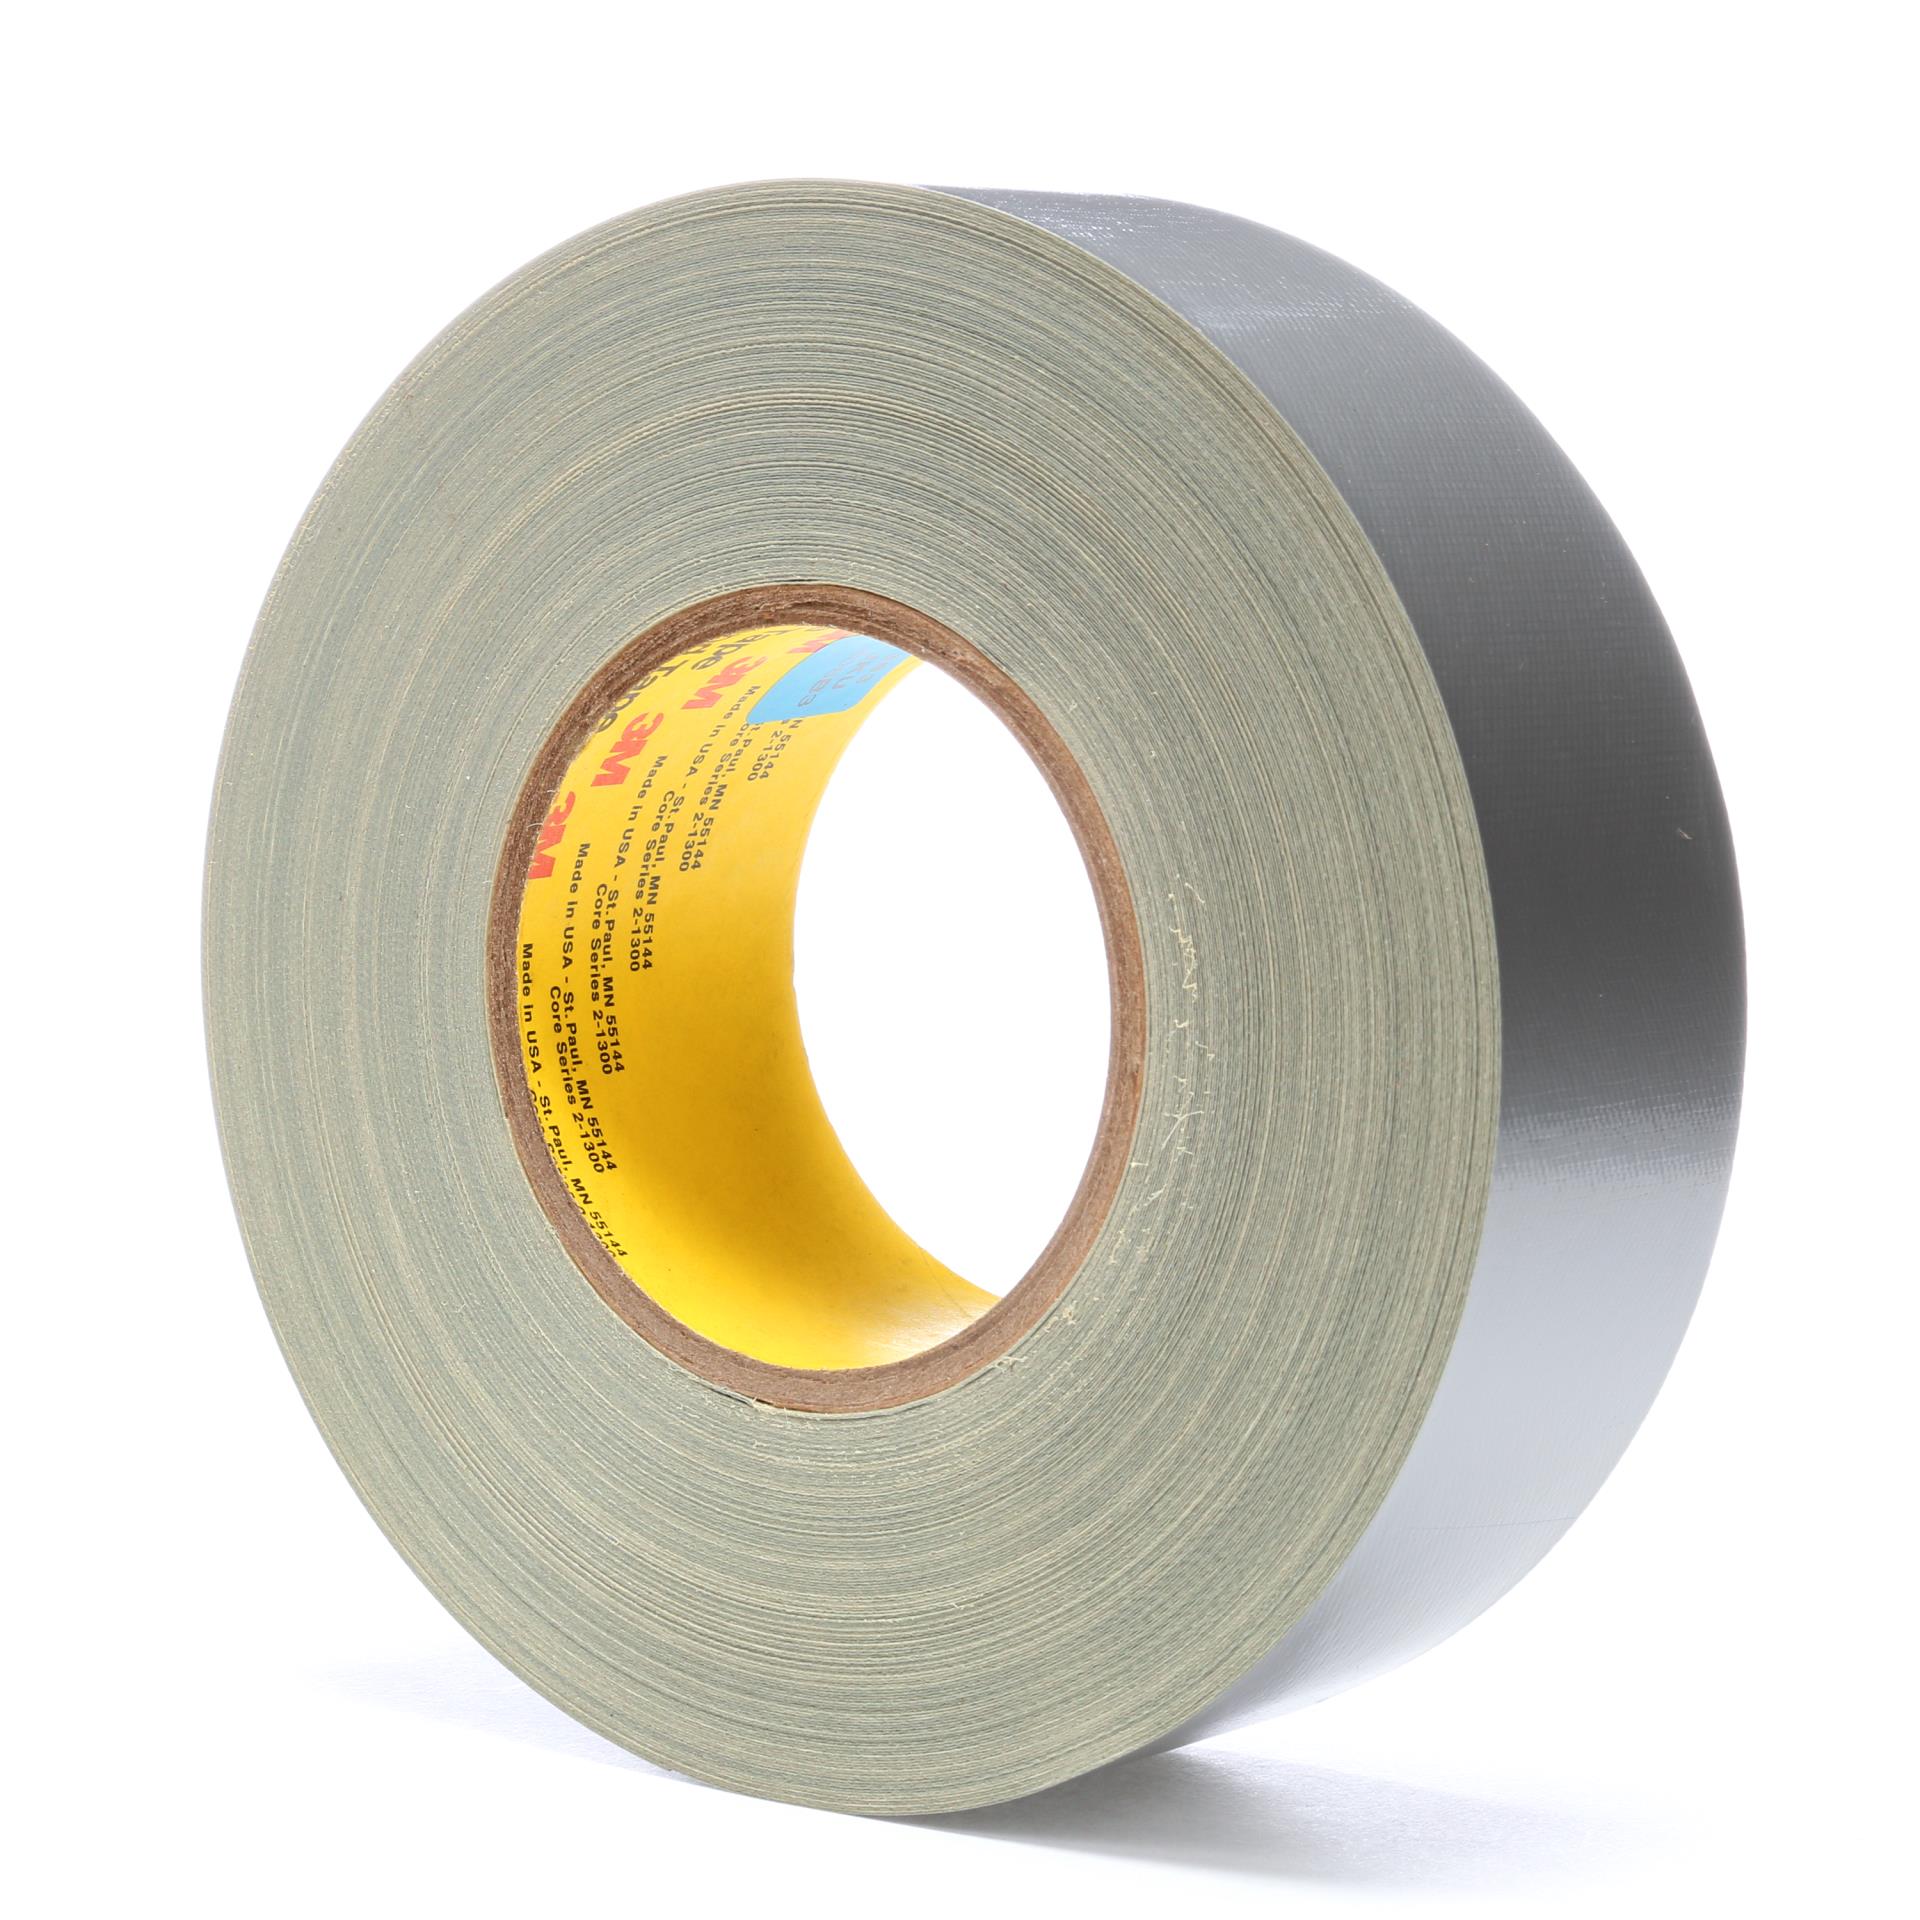 DUCK TAPE ULTIMATE WATERPROOF ADHESIVE SILVER CLOTH DUCT 50MM X 25M 